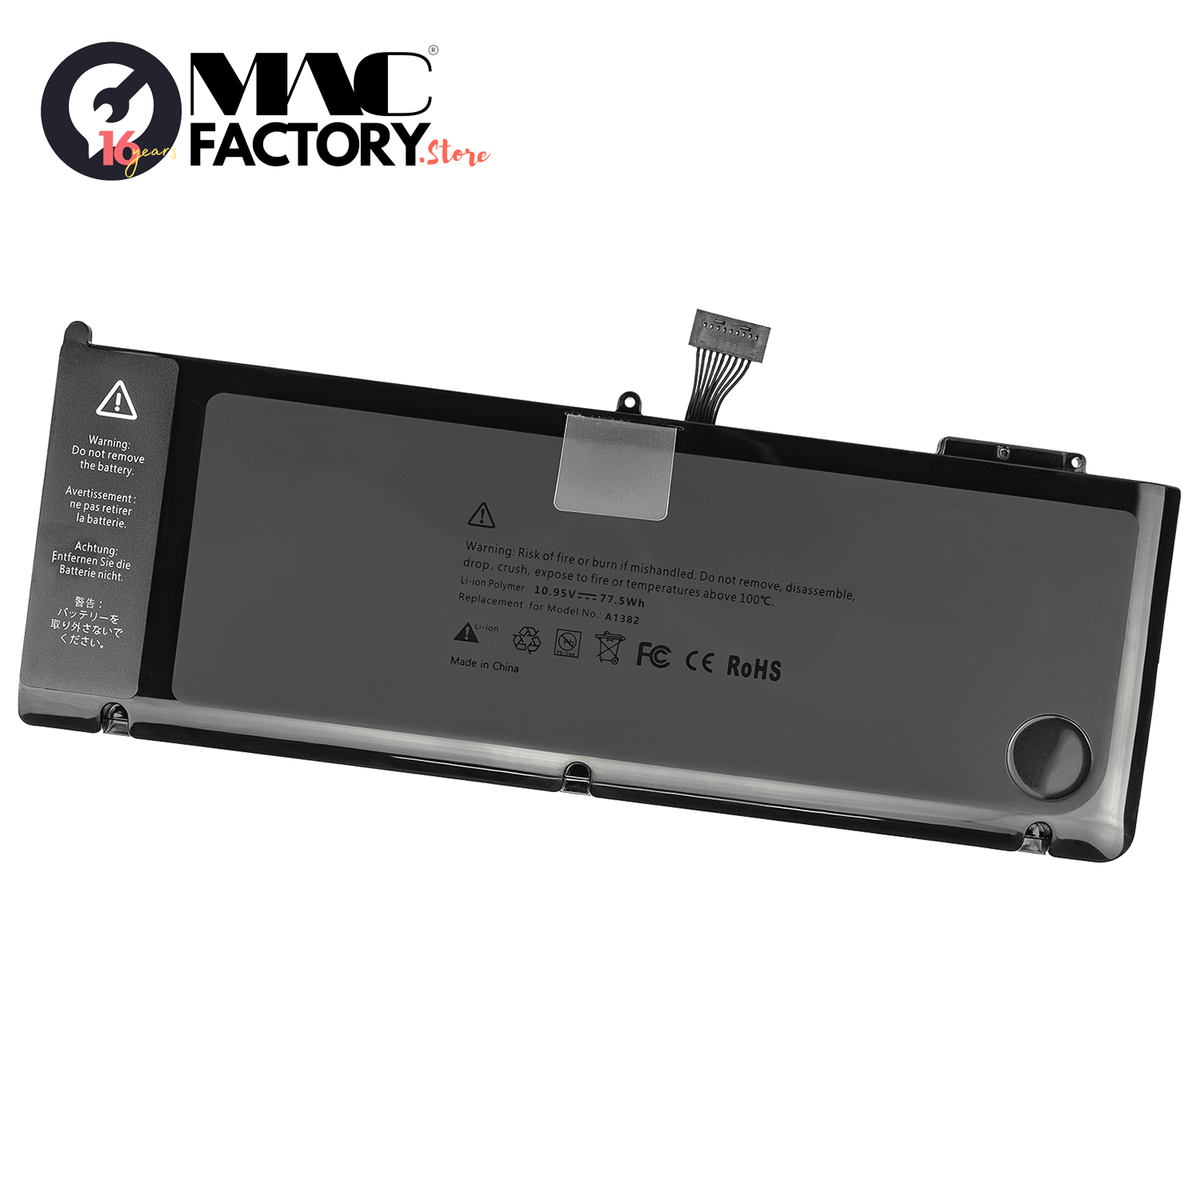 Avance A1382 10.95V 7200MAH Battery for Apple MacBook Pro Unibody 15" A1286 EARLY & LATE 2011 MID 2012